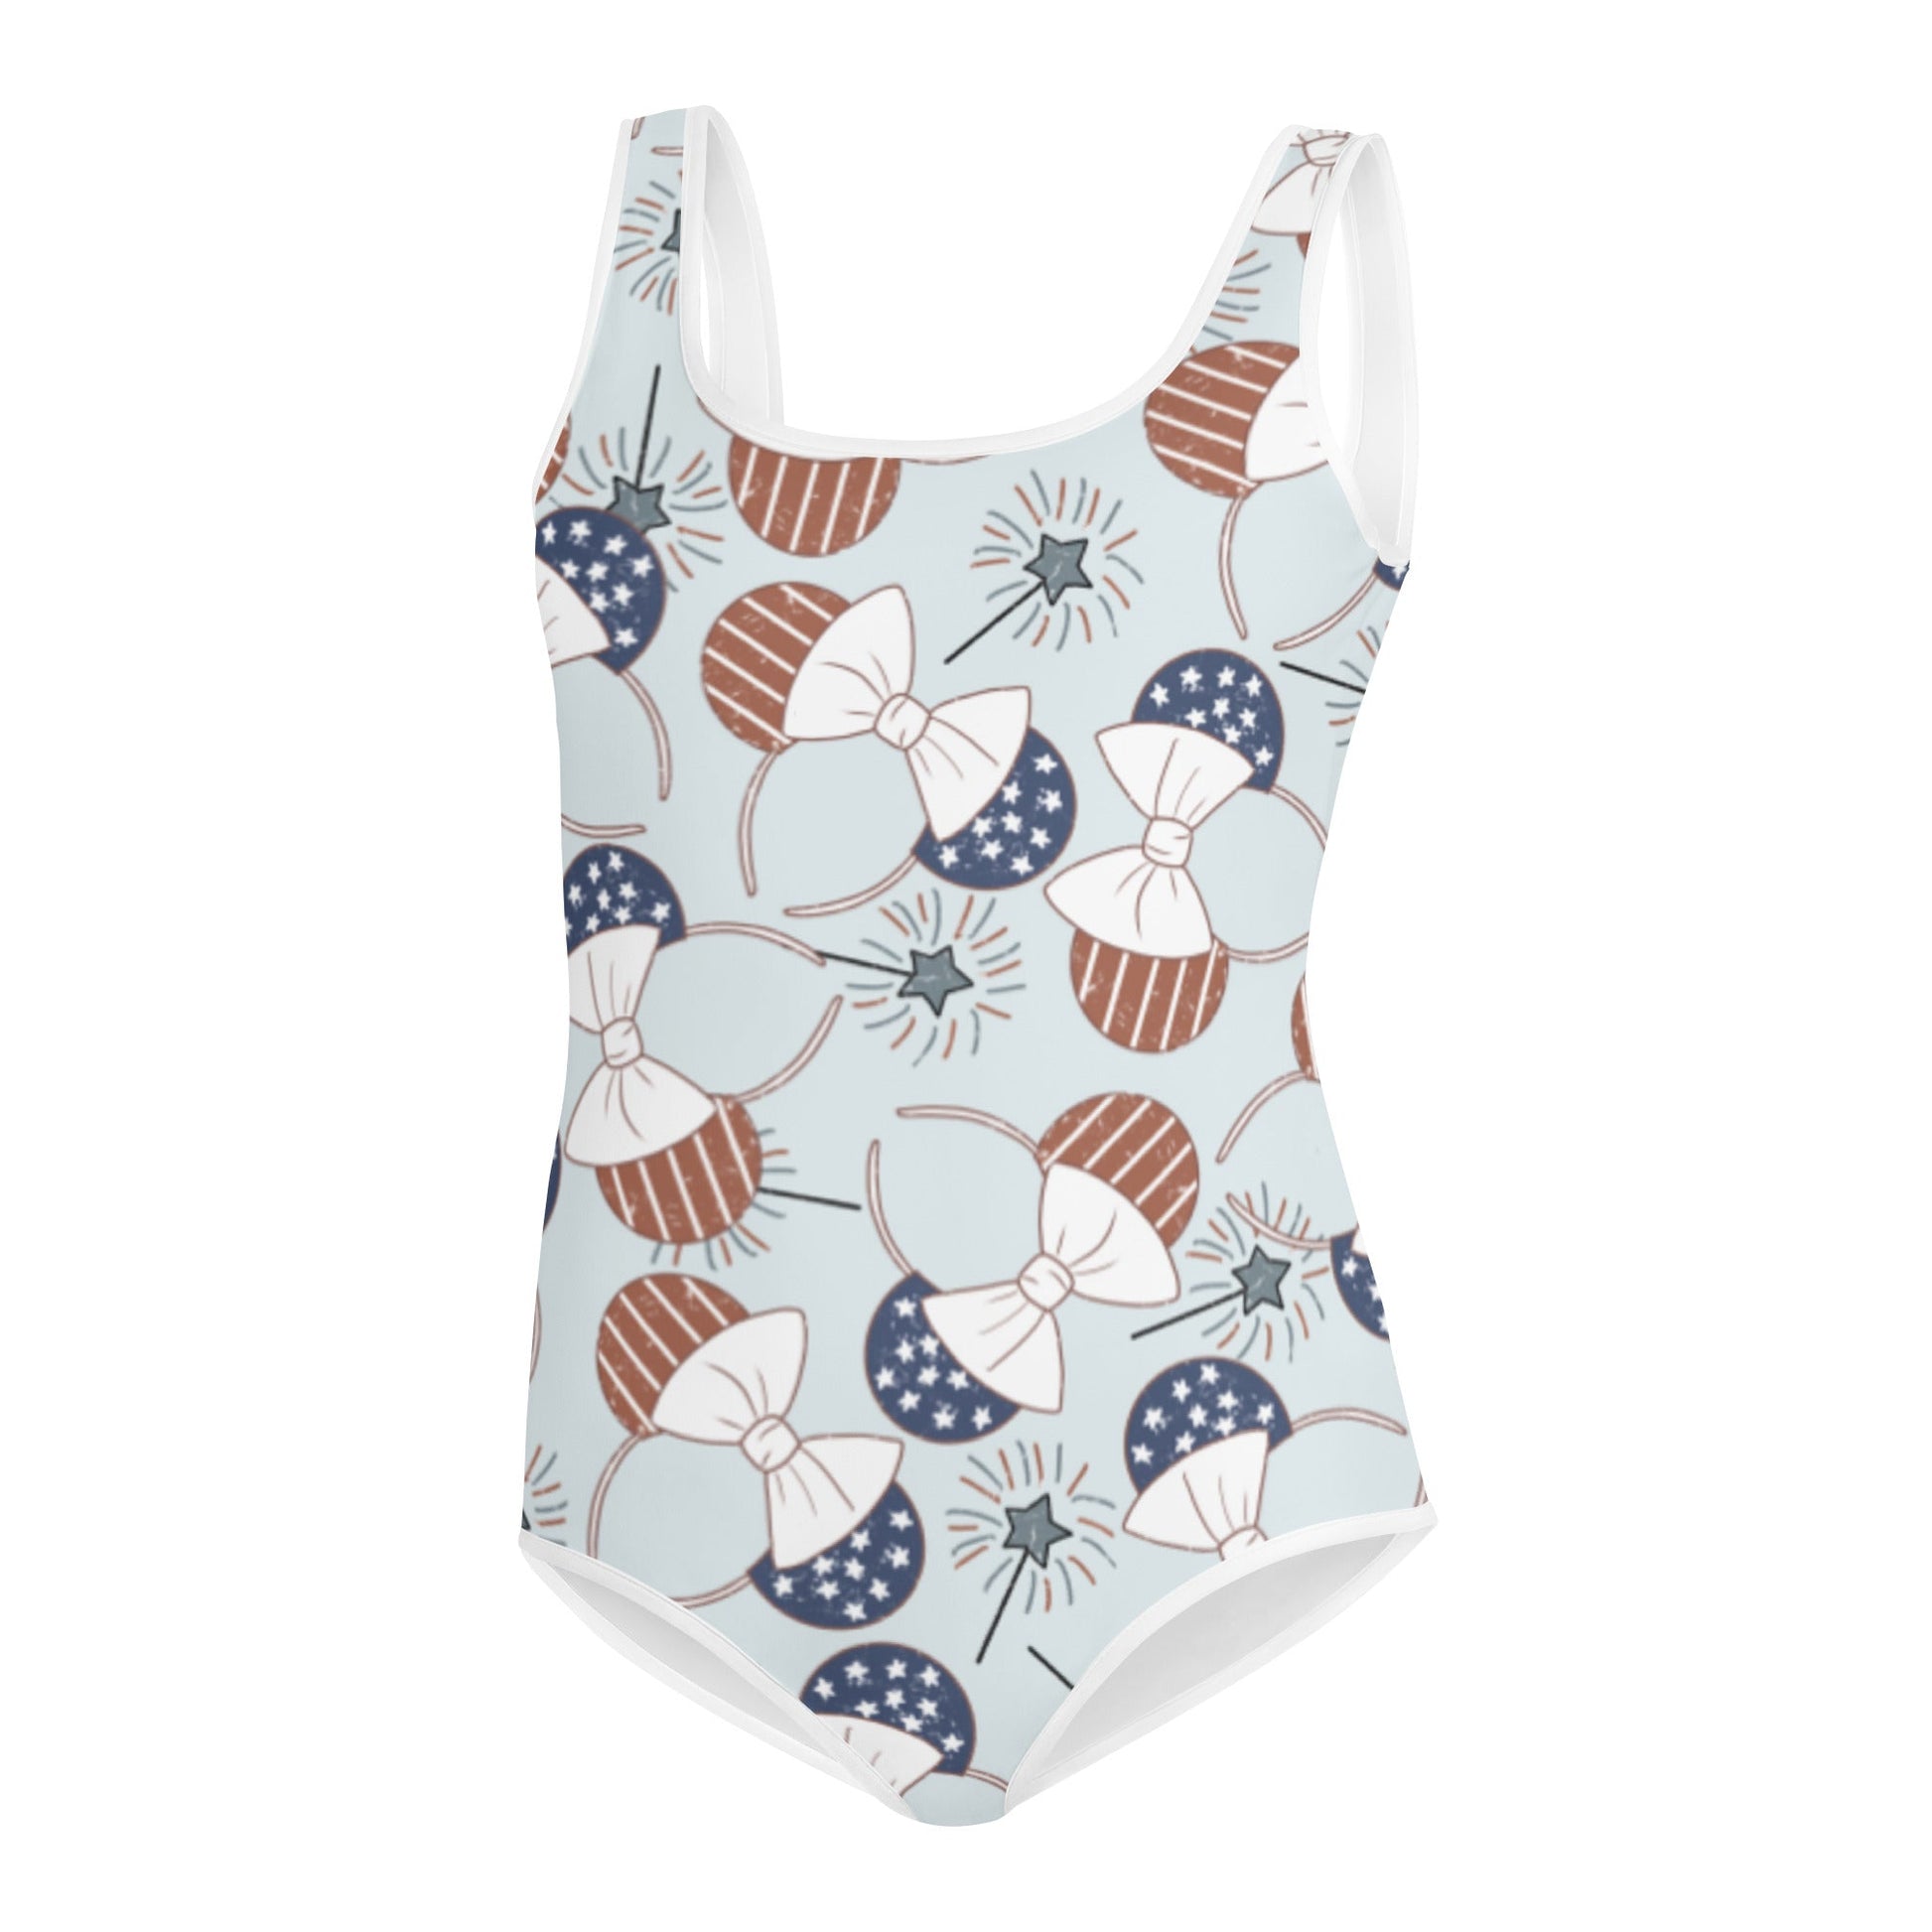 Patriotic Ears All-Over Print Youth Swimsuit happiness is addictive#tag4##tag5##tag6#